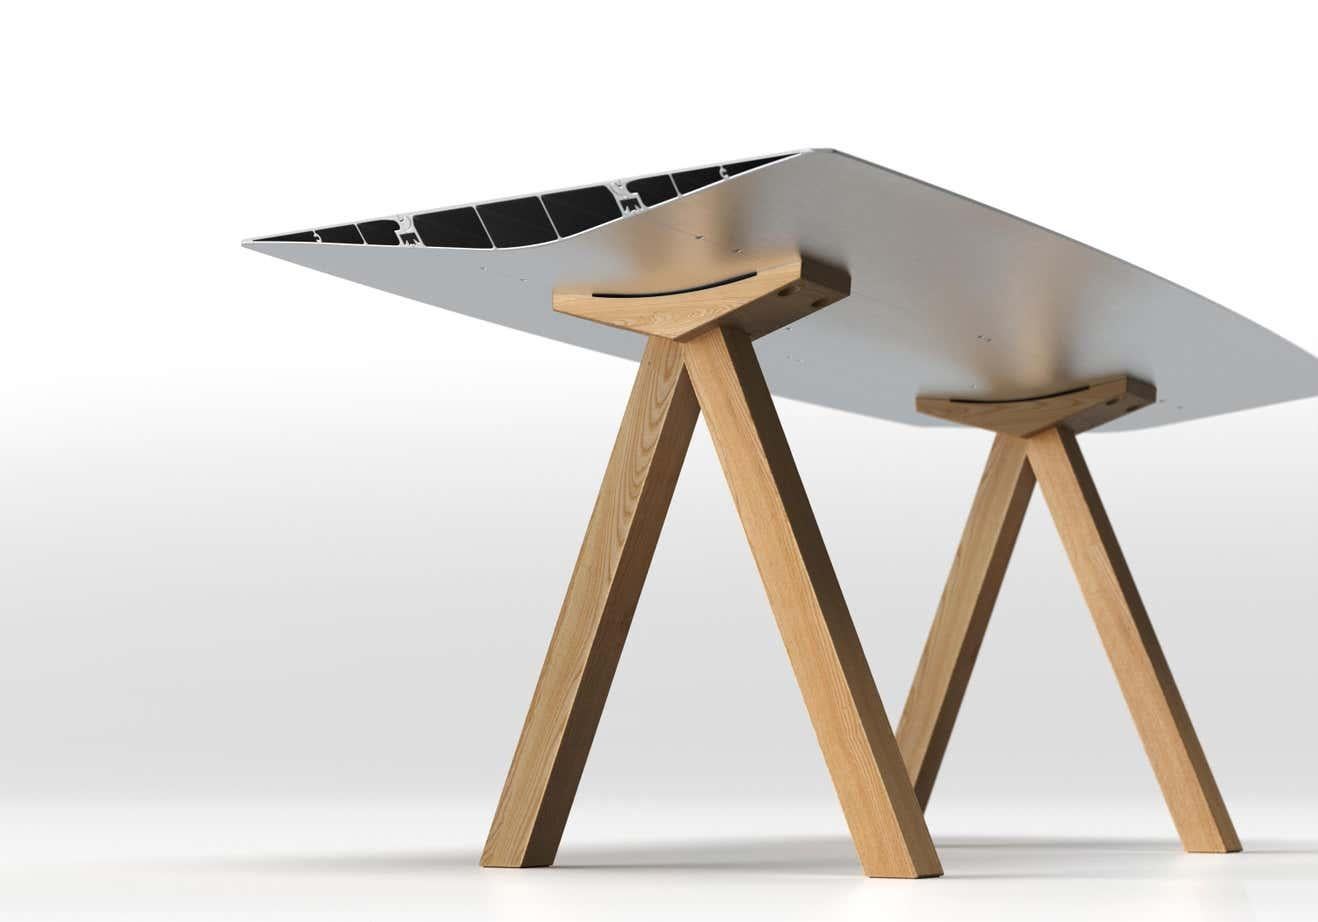 Dinning Table B 90cm x 200cm Aluminum Anodized Silver Top Wooden legs

Materials: 
Aluminium, oak, ash

Dimensions: 
D 90 cm x W 200 cm x H 74 cm

The Table B, which inaugurated the Extrusions Collection in 2009, can reach up to five metres